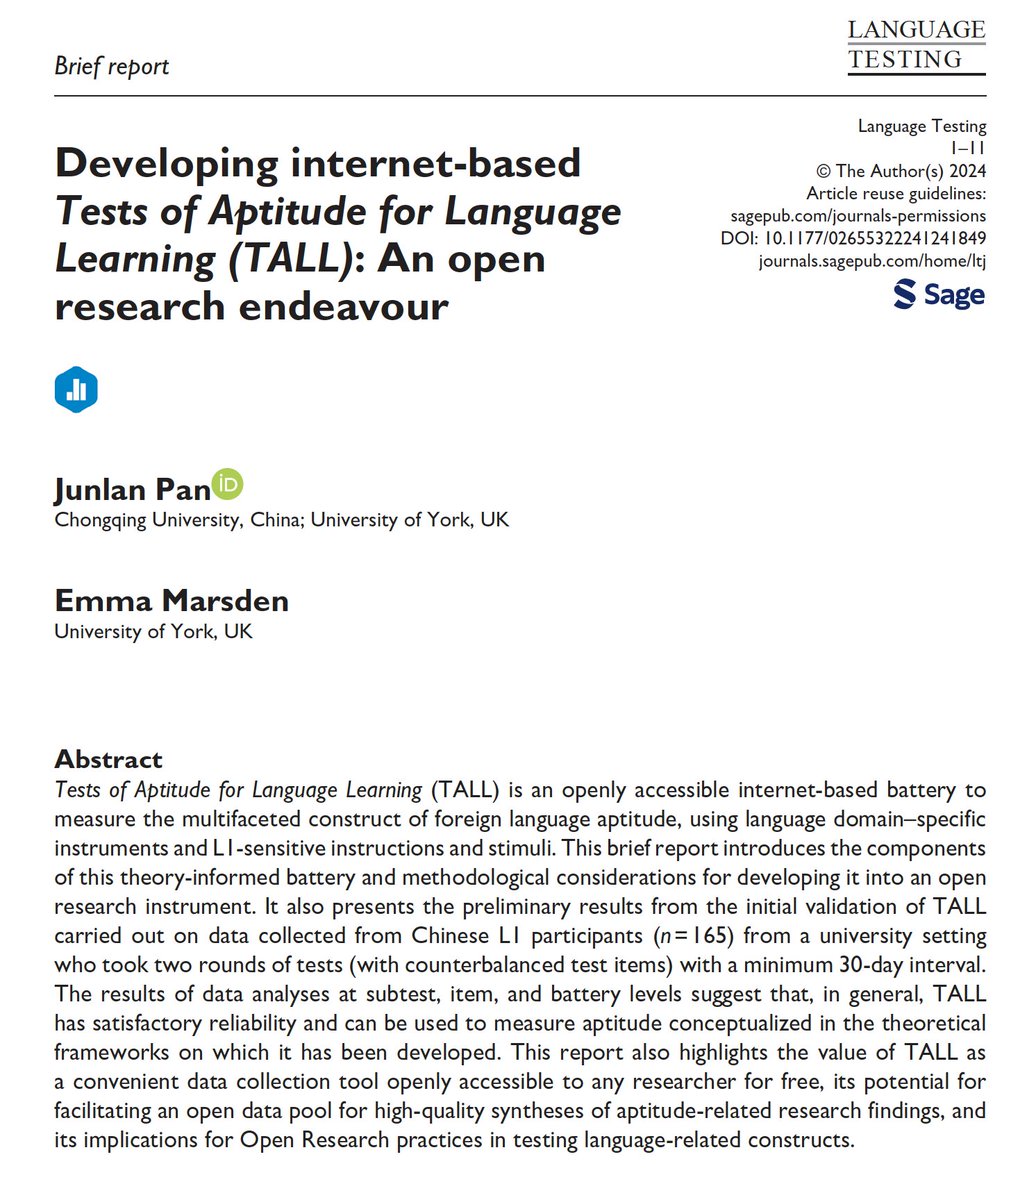 Now available in Online First, @JunlanPan and Emma Marsden (@UniOfYork) present the preliminary results from the initial validation of Tests of Aptitude for Language Learning (TALL), an open research instrument for measuring language learning aptitude. journals.sagepub.com/doi/10.1177/02…